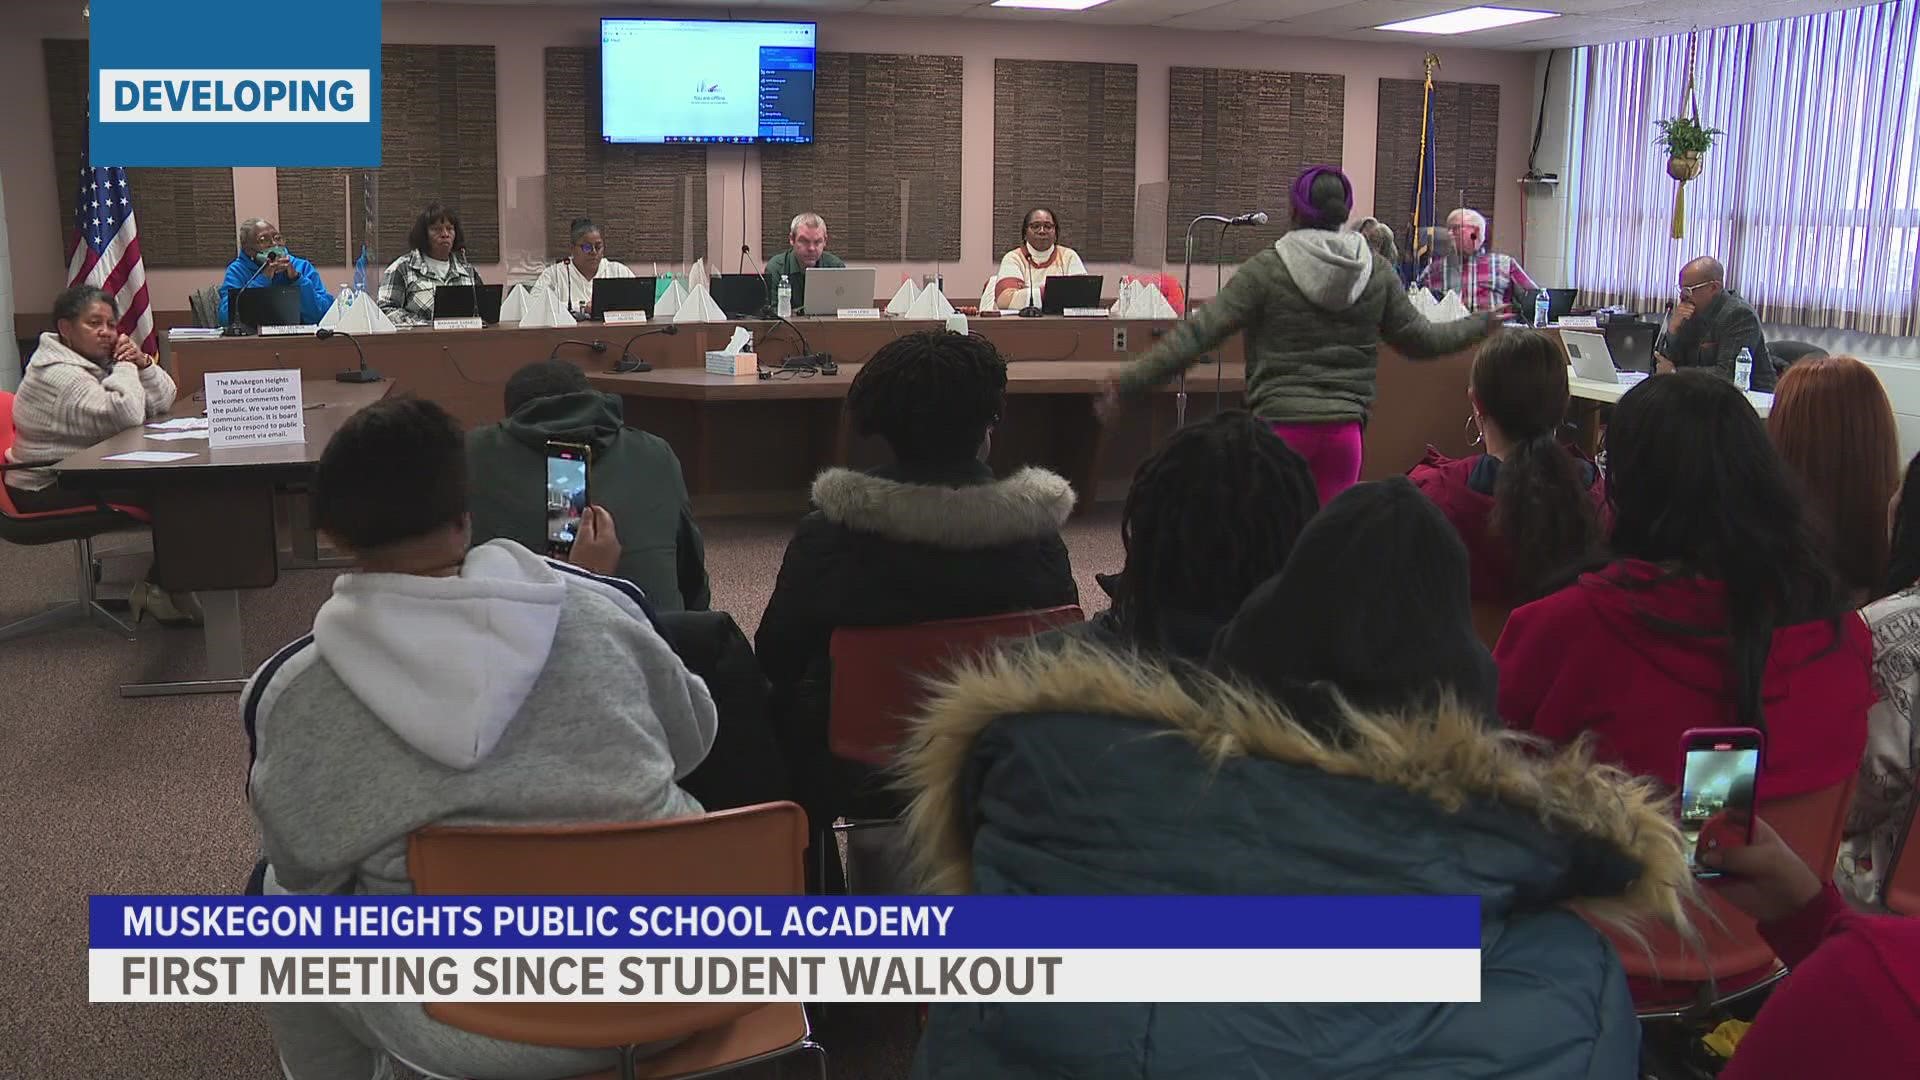 The school said any student who walked out without a parent's consent must be at the meeting with their parent or guardian.